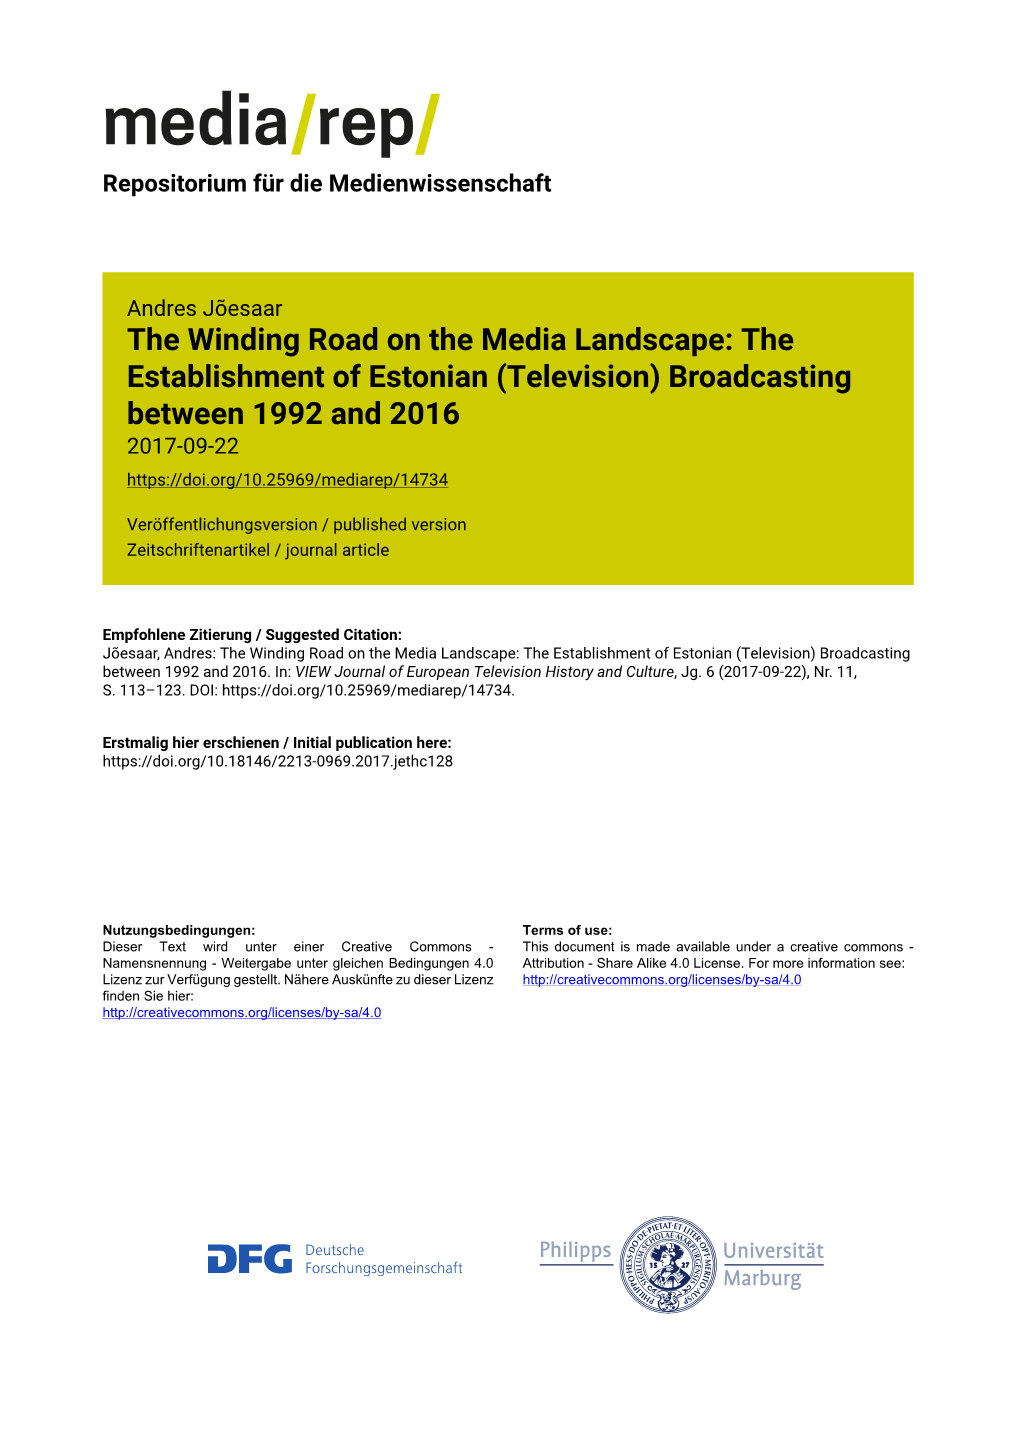 The Winding Road on the Media Landscape: the Establishment Of